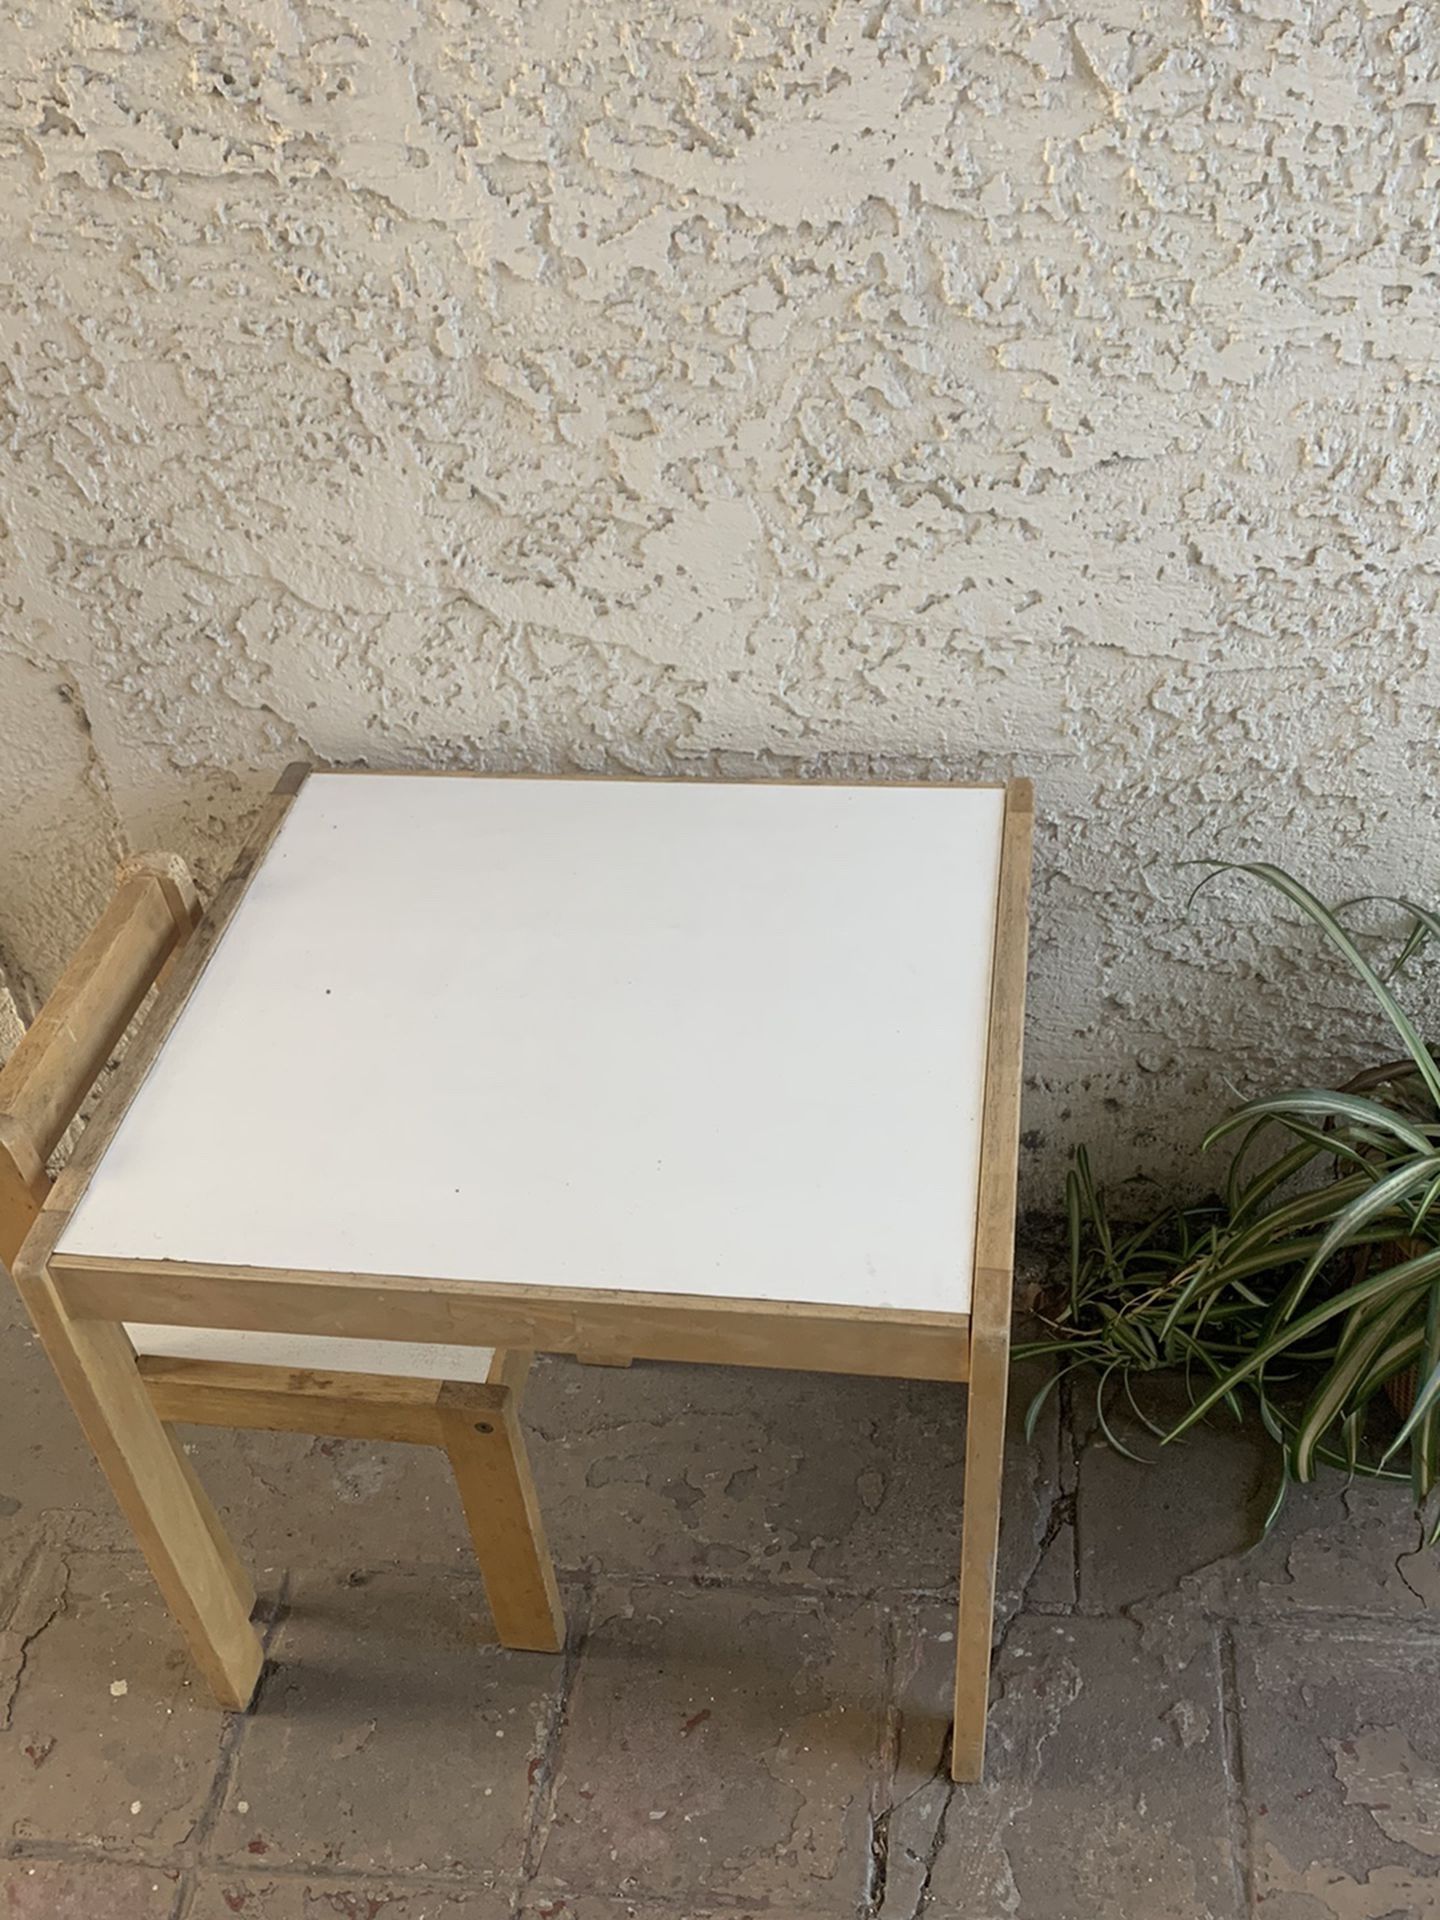 IKEA Kids Table And Chair